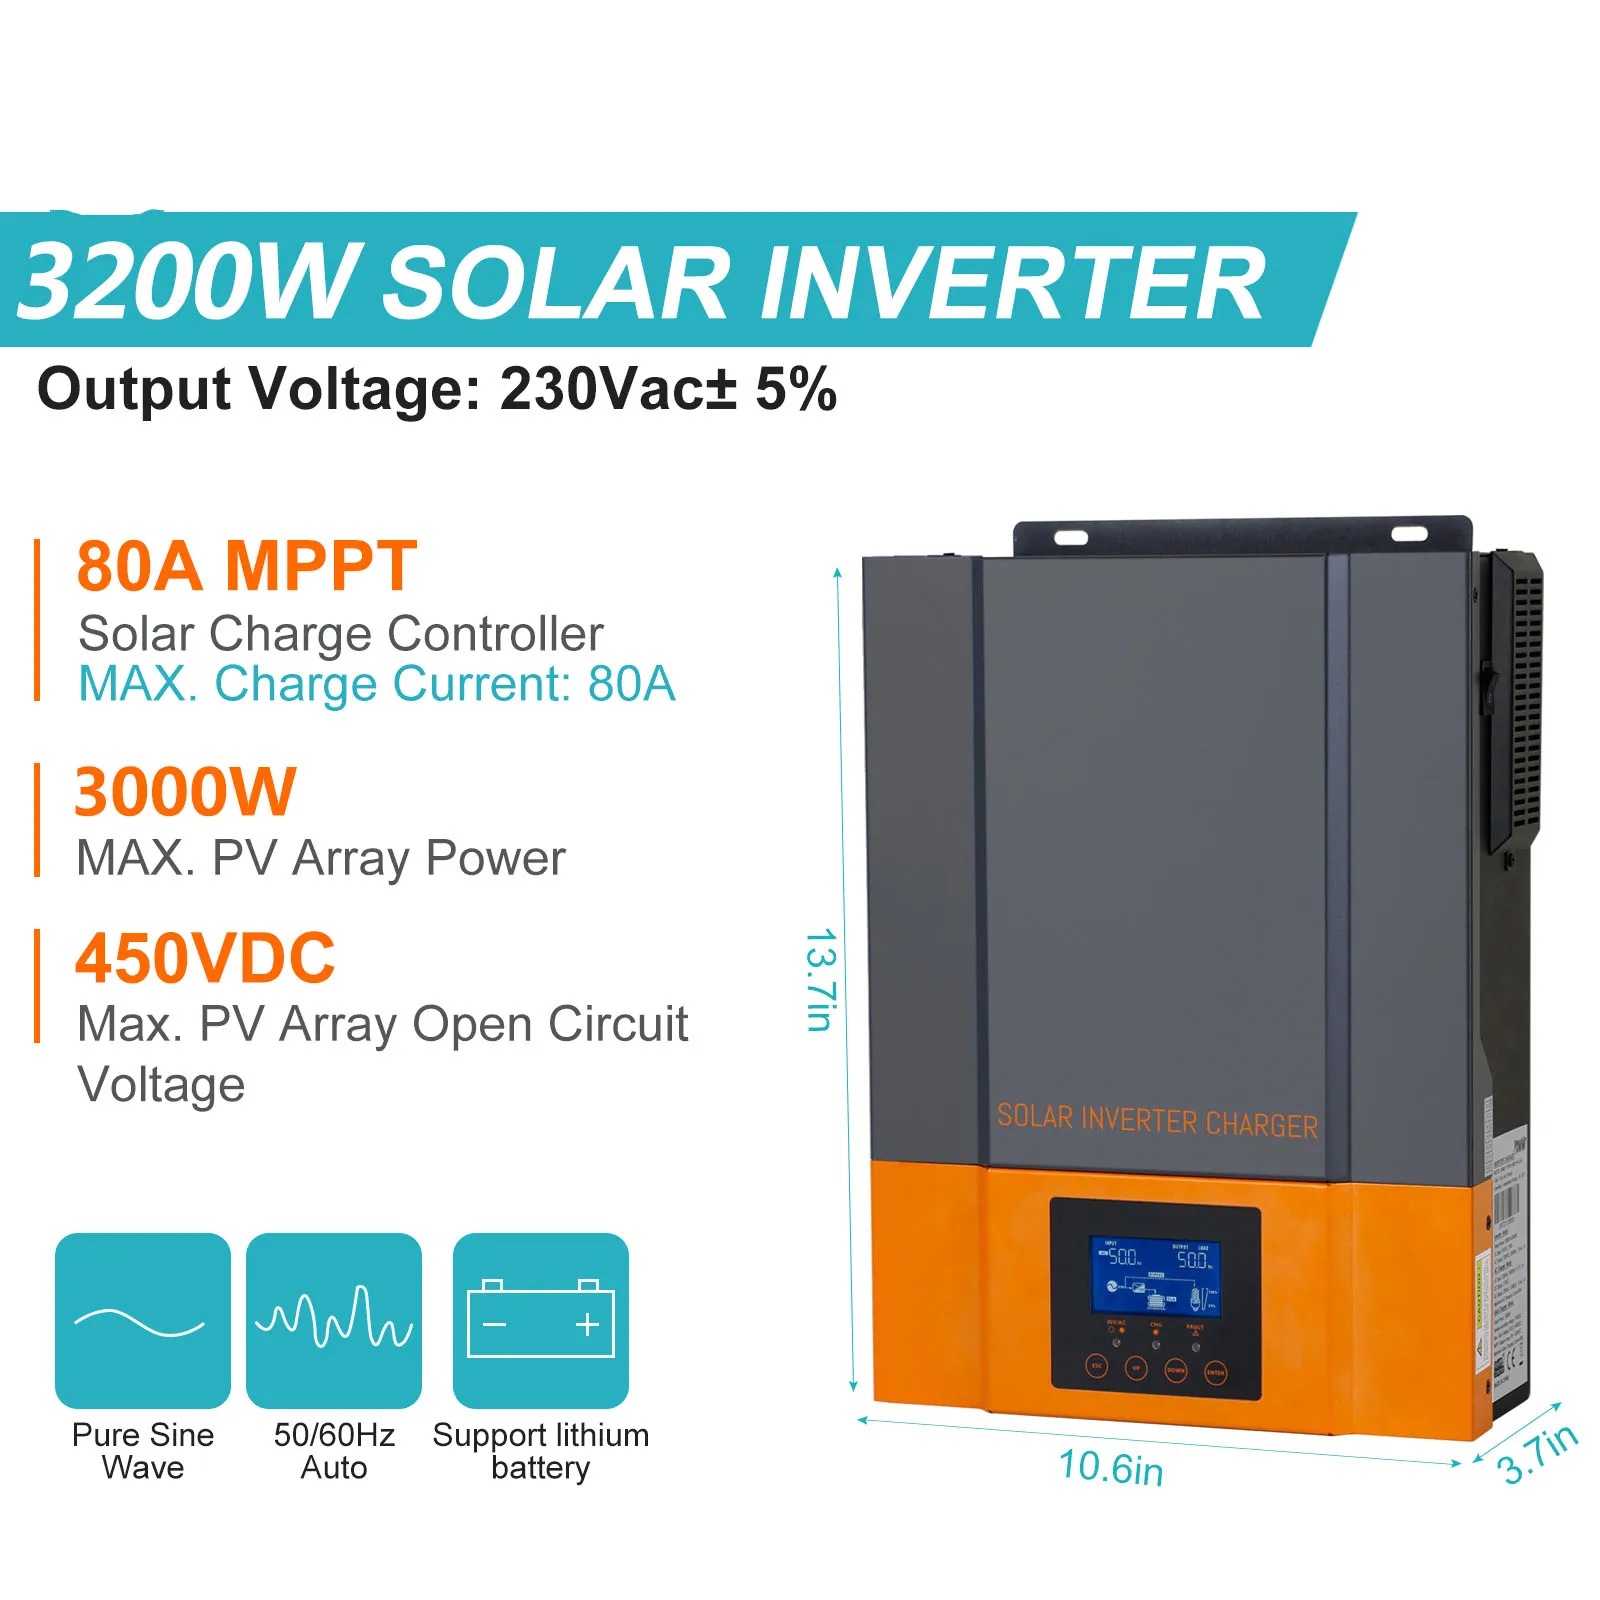 

T50 3200VA 3000W Solar Inverter 24V Built in MPPT 80A Solar Controller 230VAC Out-put Voltage Max PV 450VDC Support WIFI